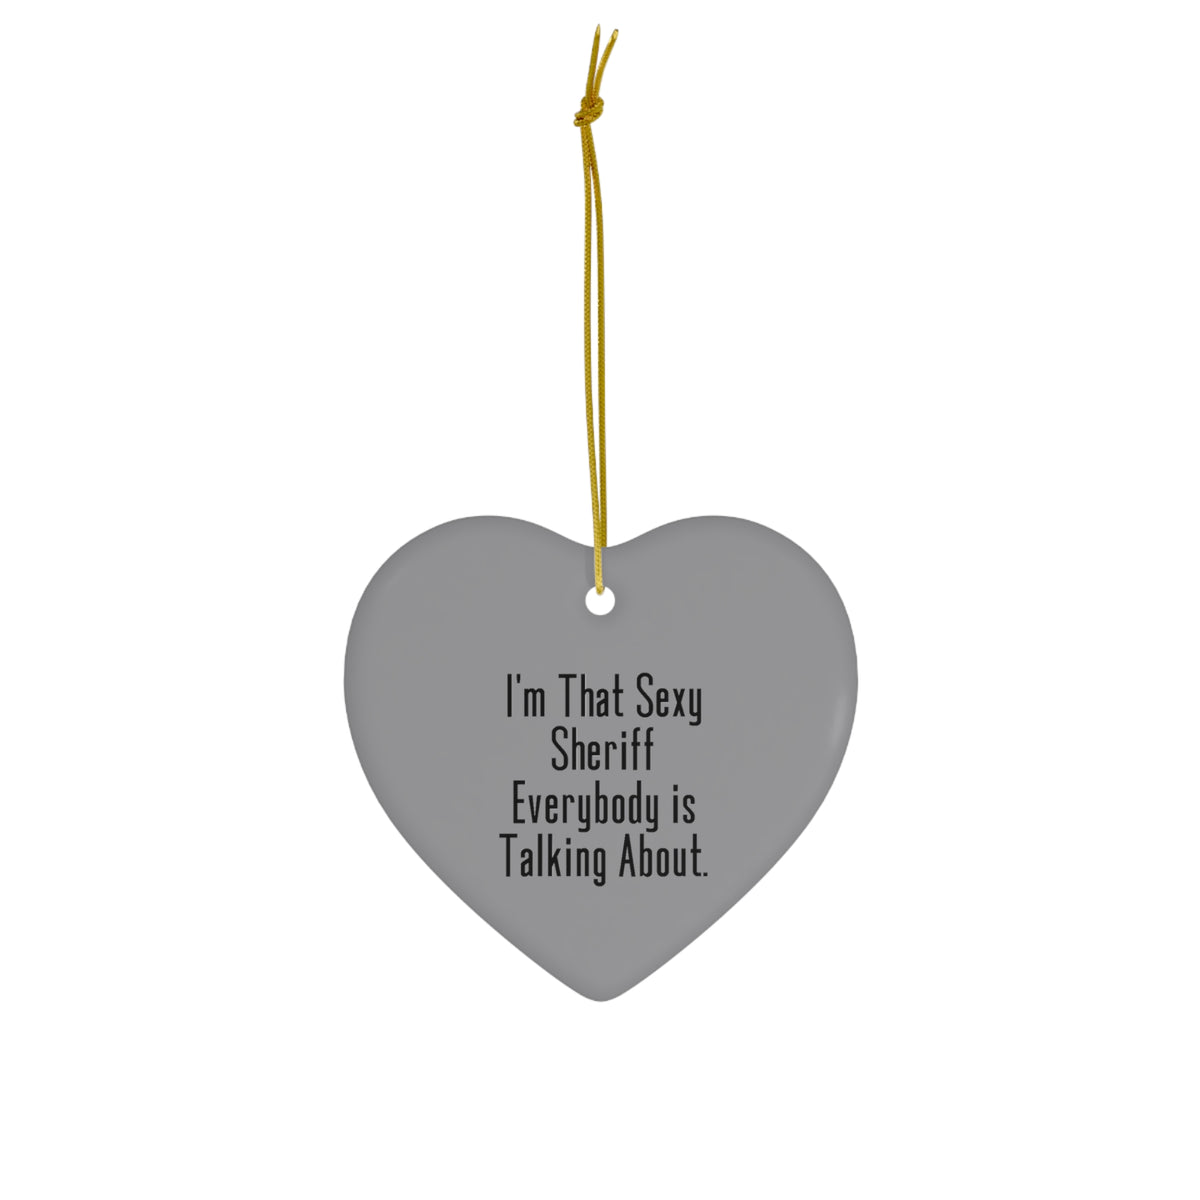 Gag Sheriff Gifts, I'm That Sexy Sheriff, Perfect Birthday Heart Ornament for Coworkers, Christmas Ornament from Coworkers, Cheap Sheriff Gifts Under, Inexpensive Sheriff Gifts, Affordable Sheriff